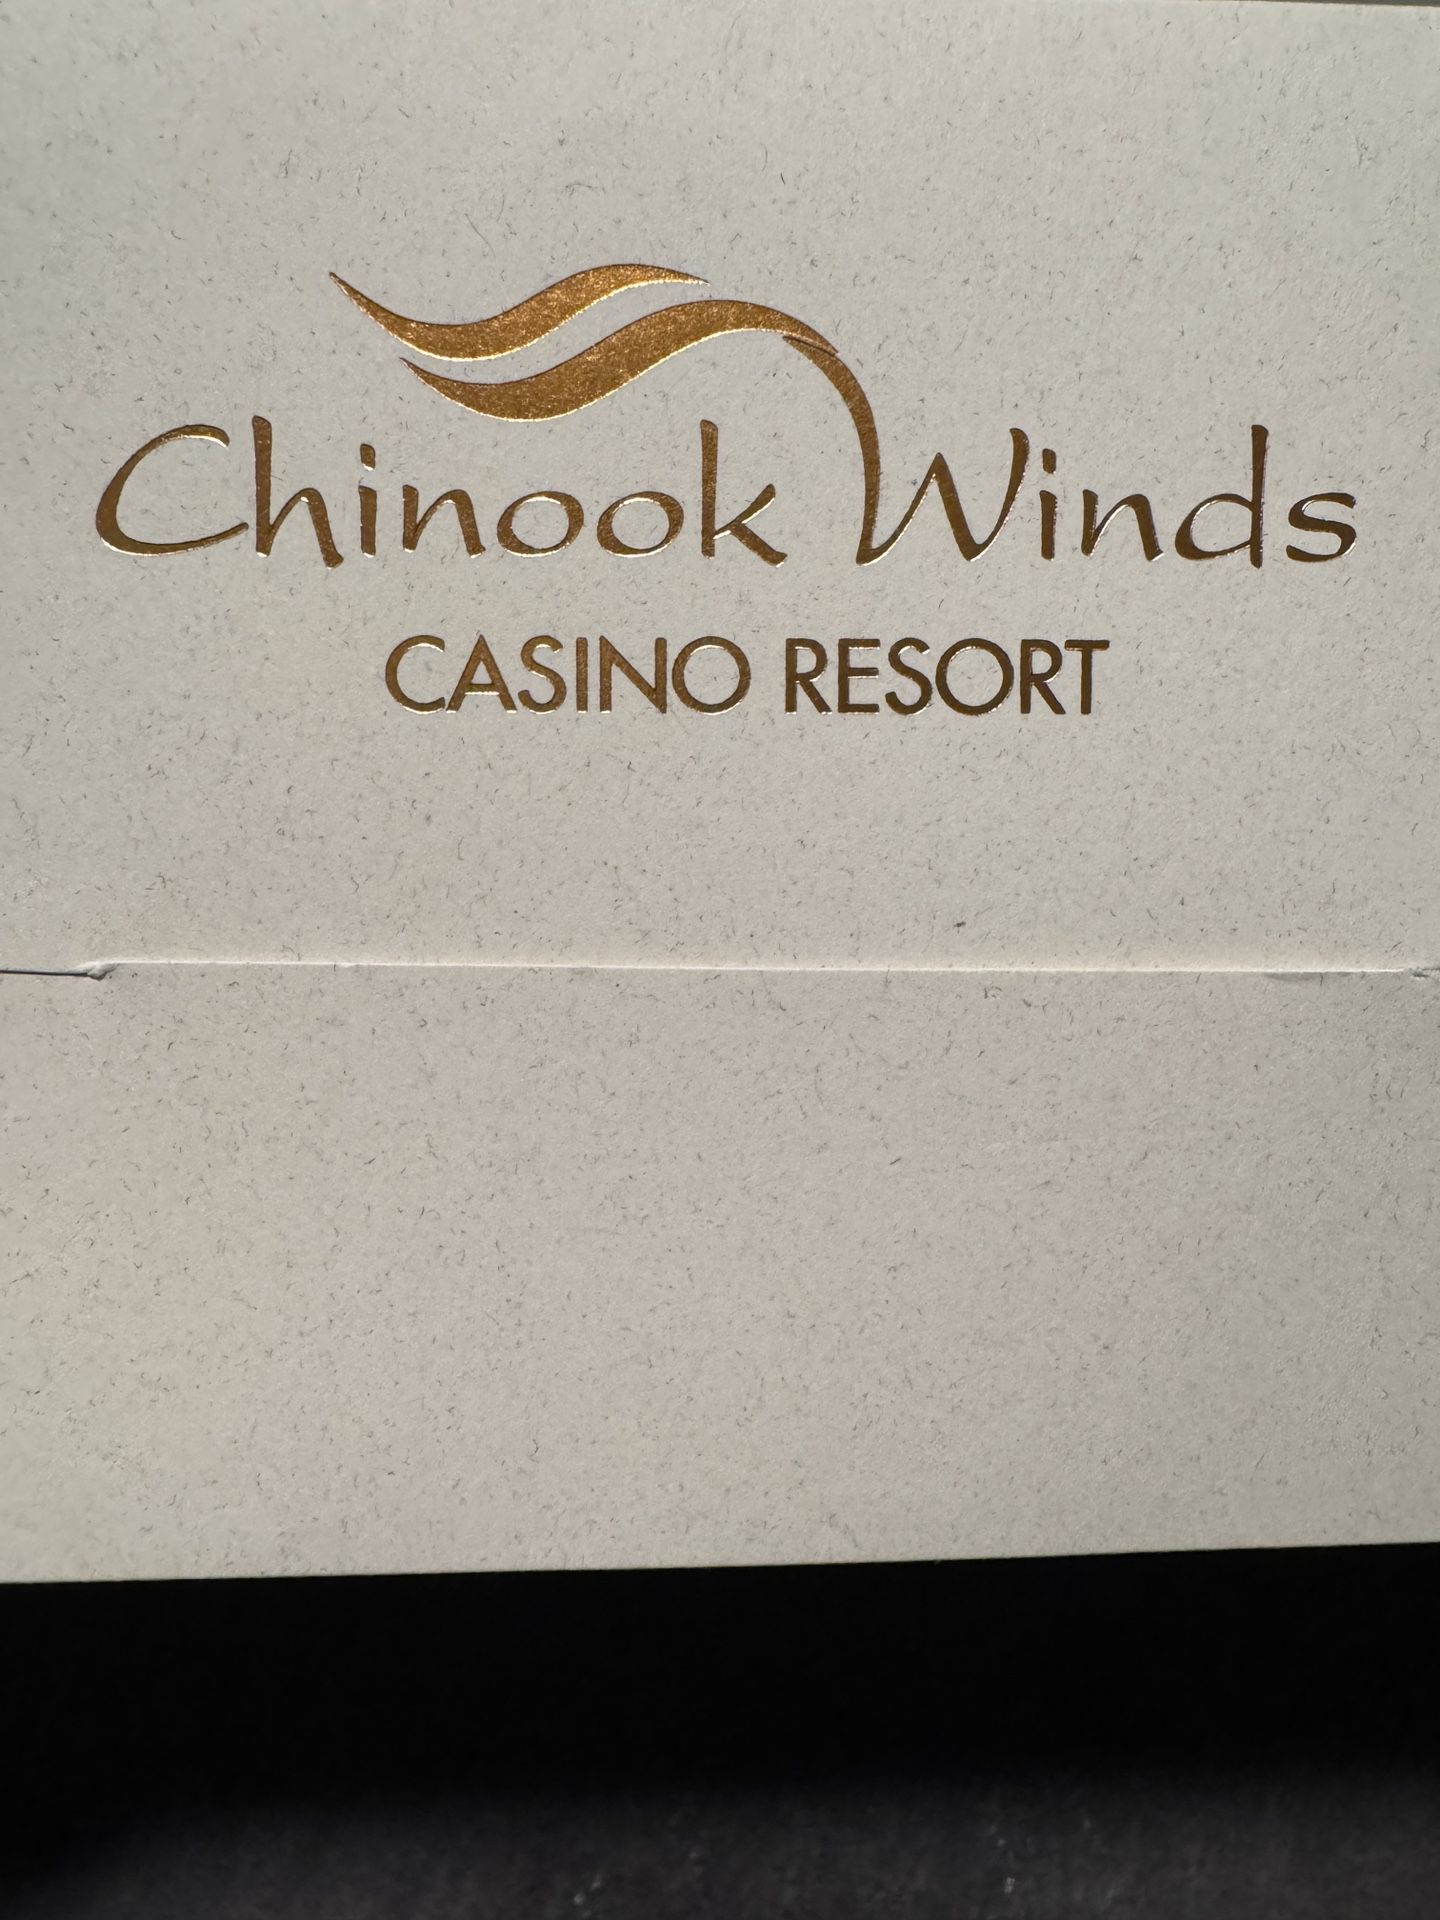 One Night For Two-Standard Room at Chinook Winds Casino Resort Hotel